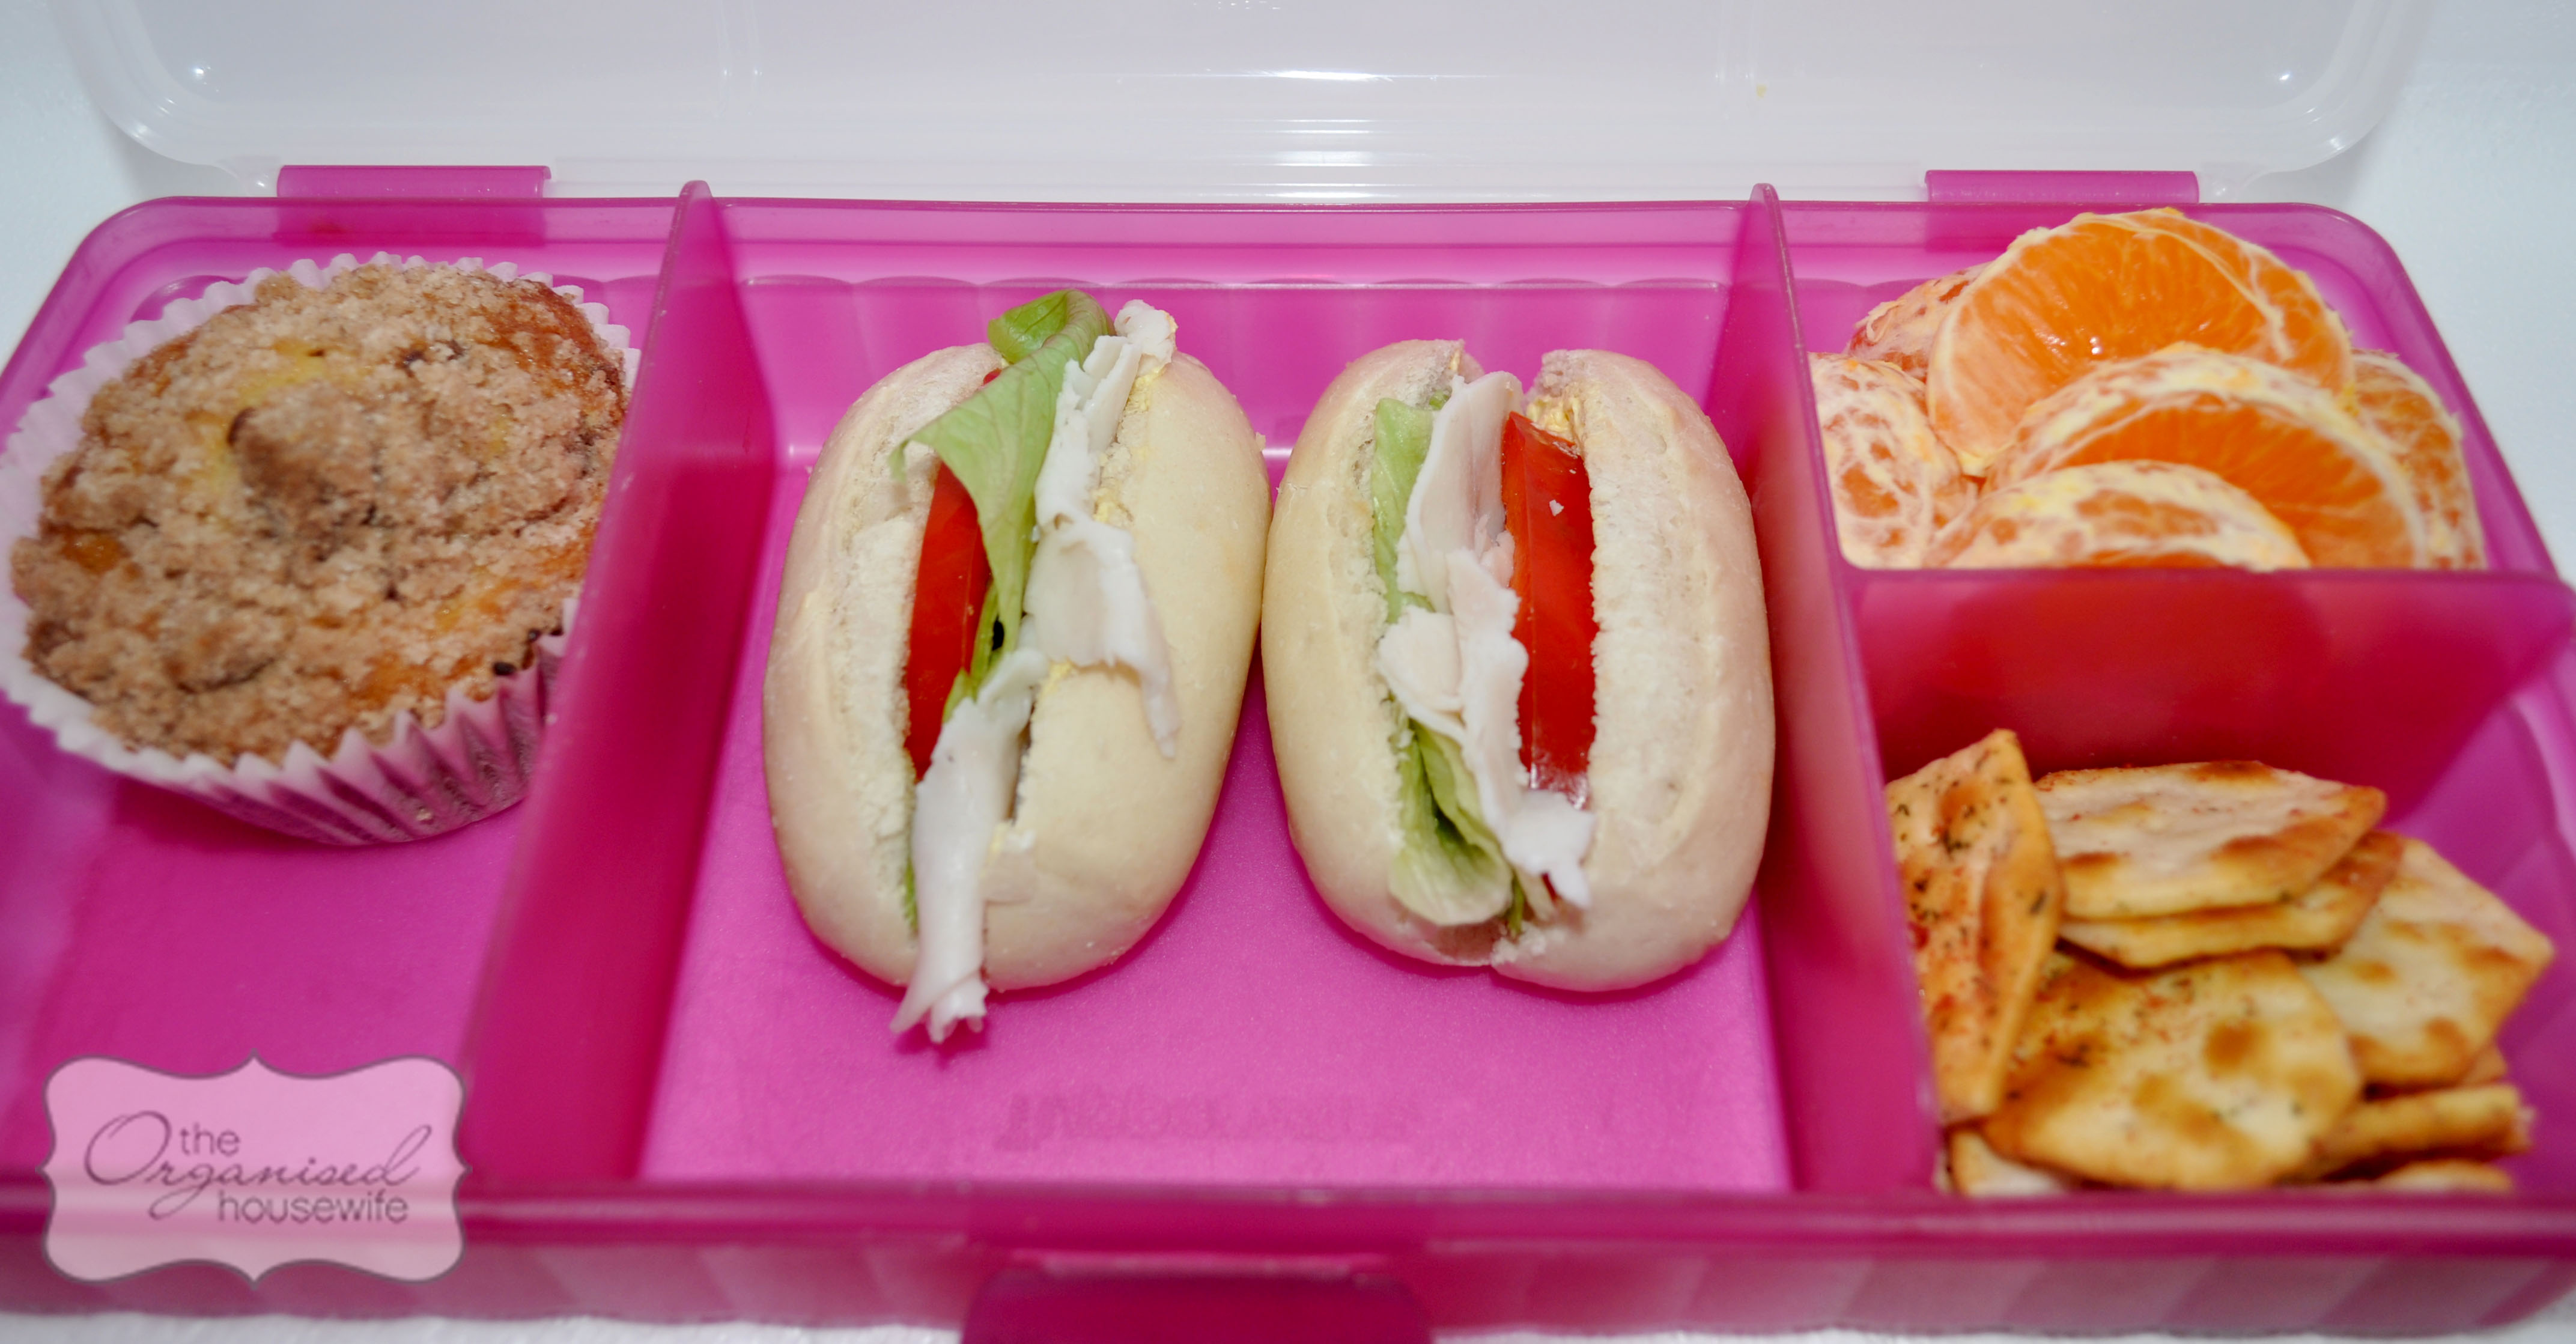 Hot School Lunch Ideas for Kids - The Organised Housewife